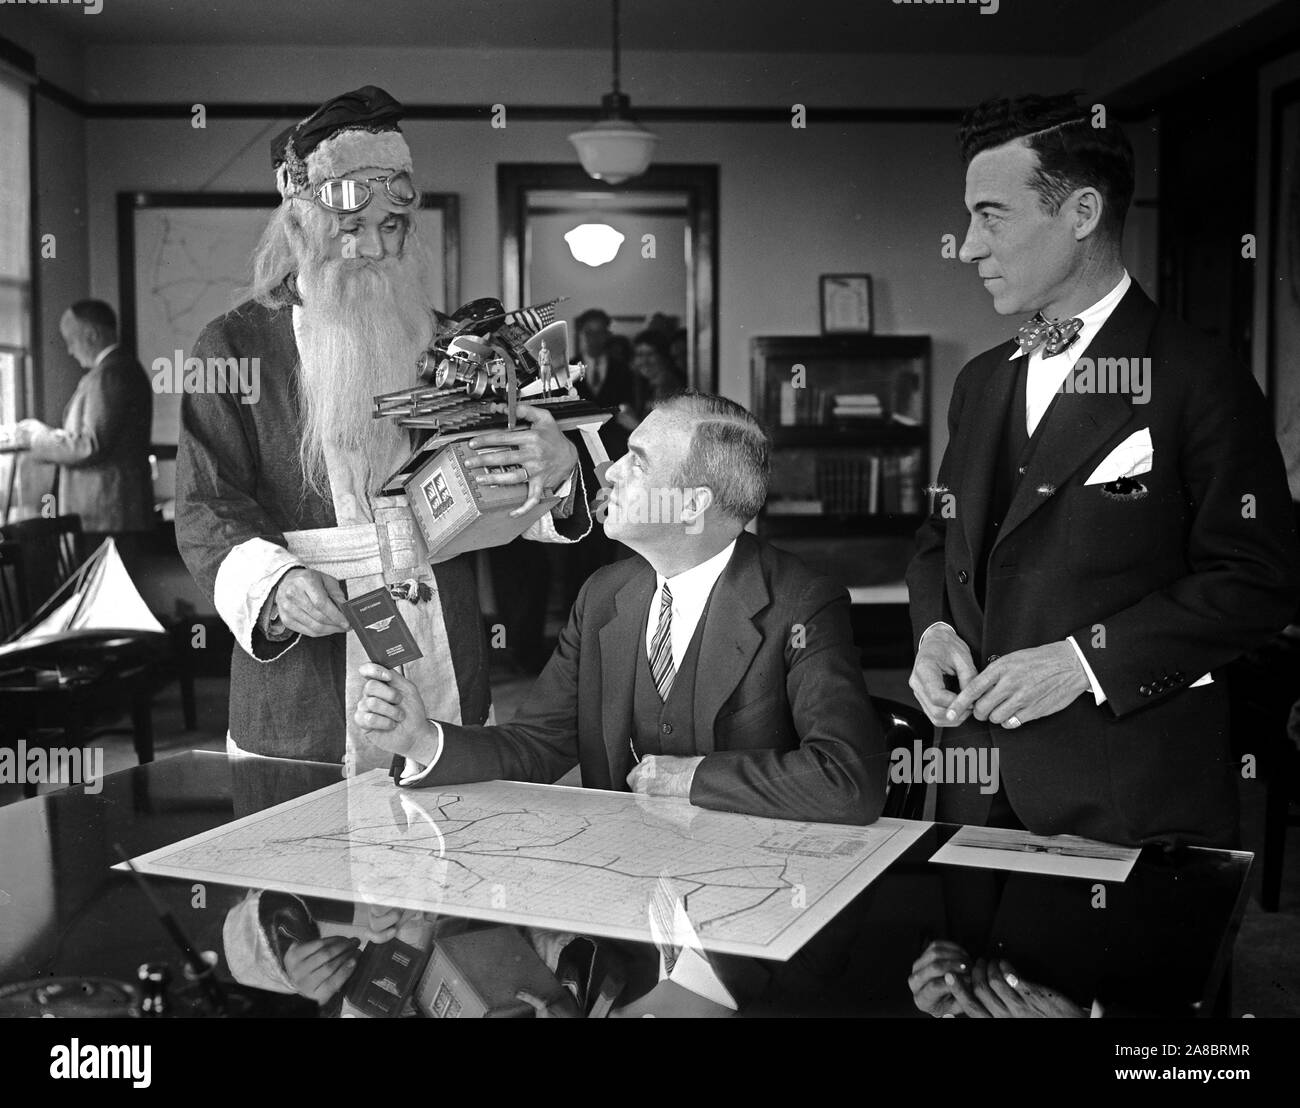 Santa Claus receives aeroplane pilot's license from Assistant Secretary of Commerce. Although there may not be sufficient snow for his reindeer sleigh, Santa Claus will still be able to deliver his load of presents on time this Christmas by using the air route. The old saint called at the Commerce Department in Washington today where he is shown receiving an aeroplane pilot's license from Assistant Secretary of Commerce. for Aeronautics William P. MacCracken, while Clarence M. Young (right) Director of Aeronautics, Department of Commerce, looks on. Stock Photo